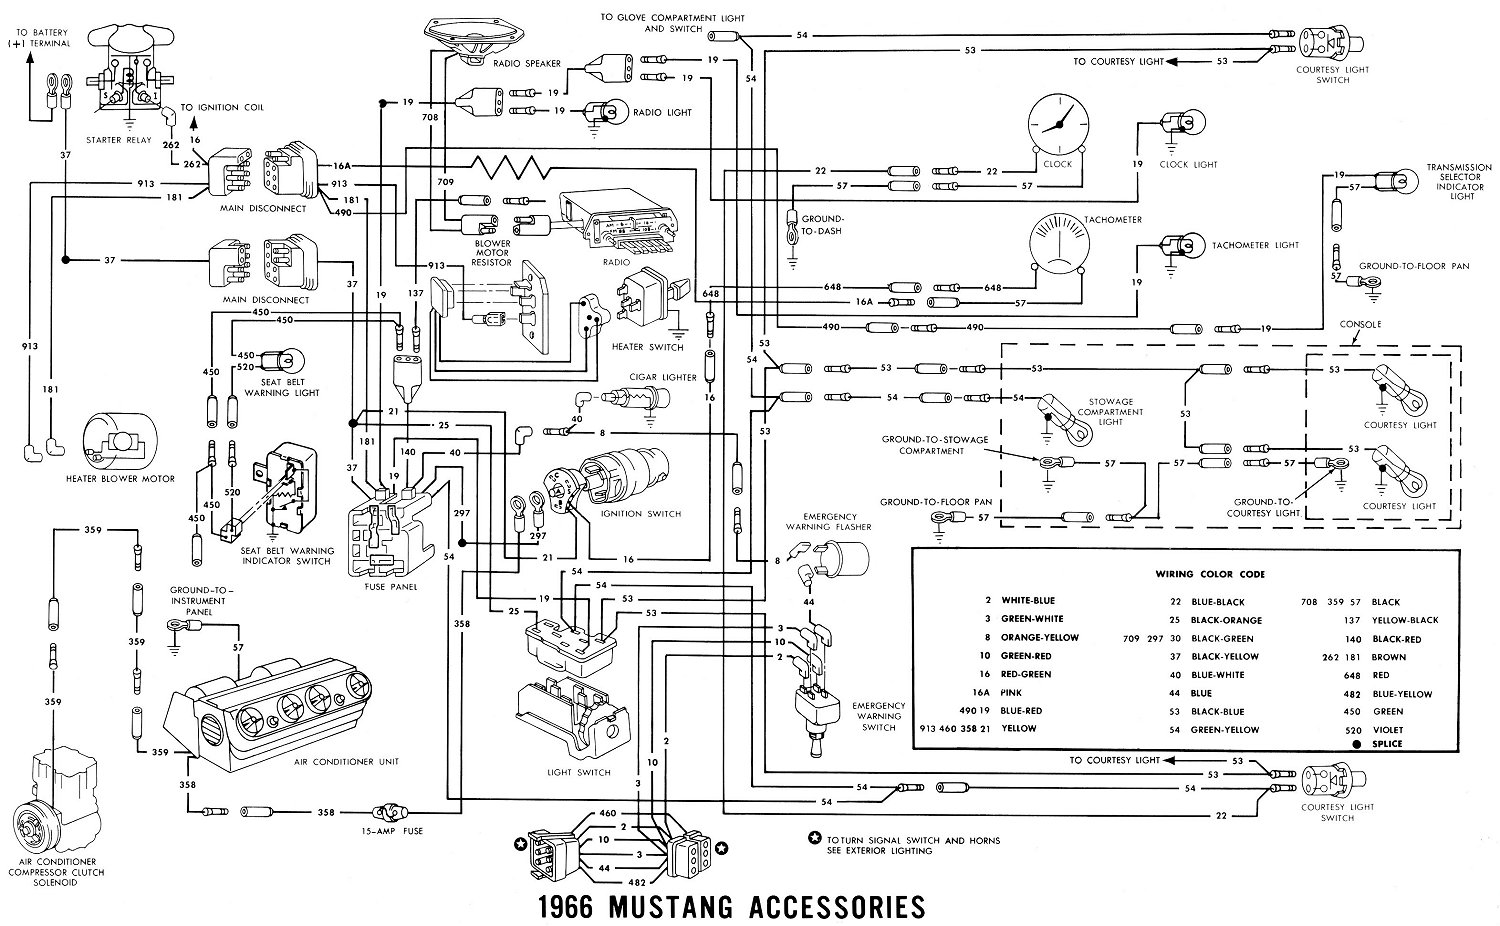 1965 mustang colorized wiring diagram book